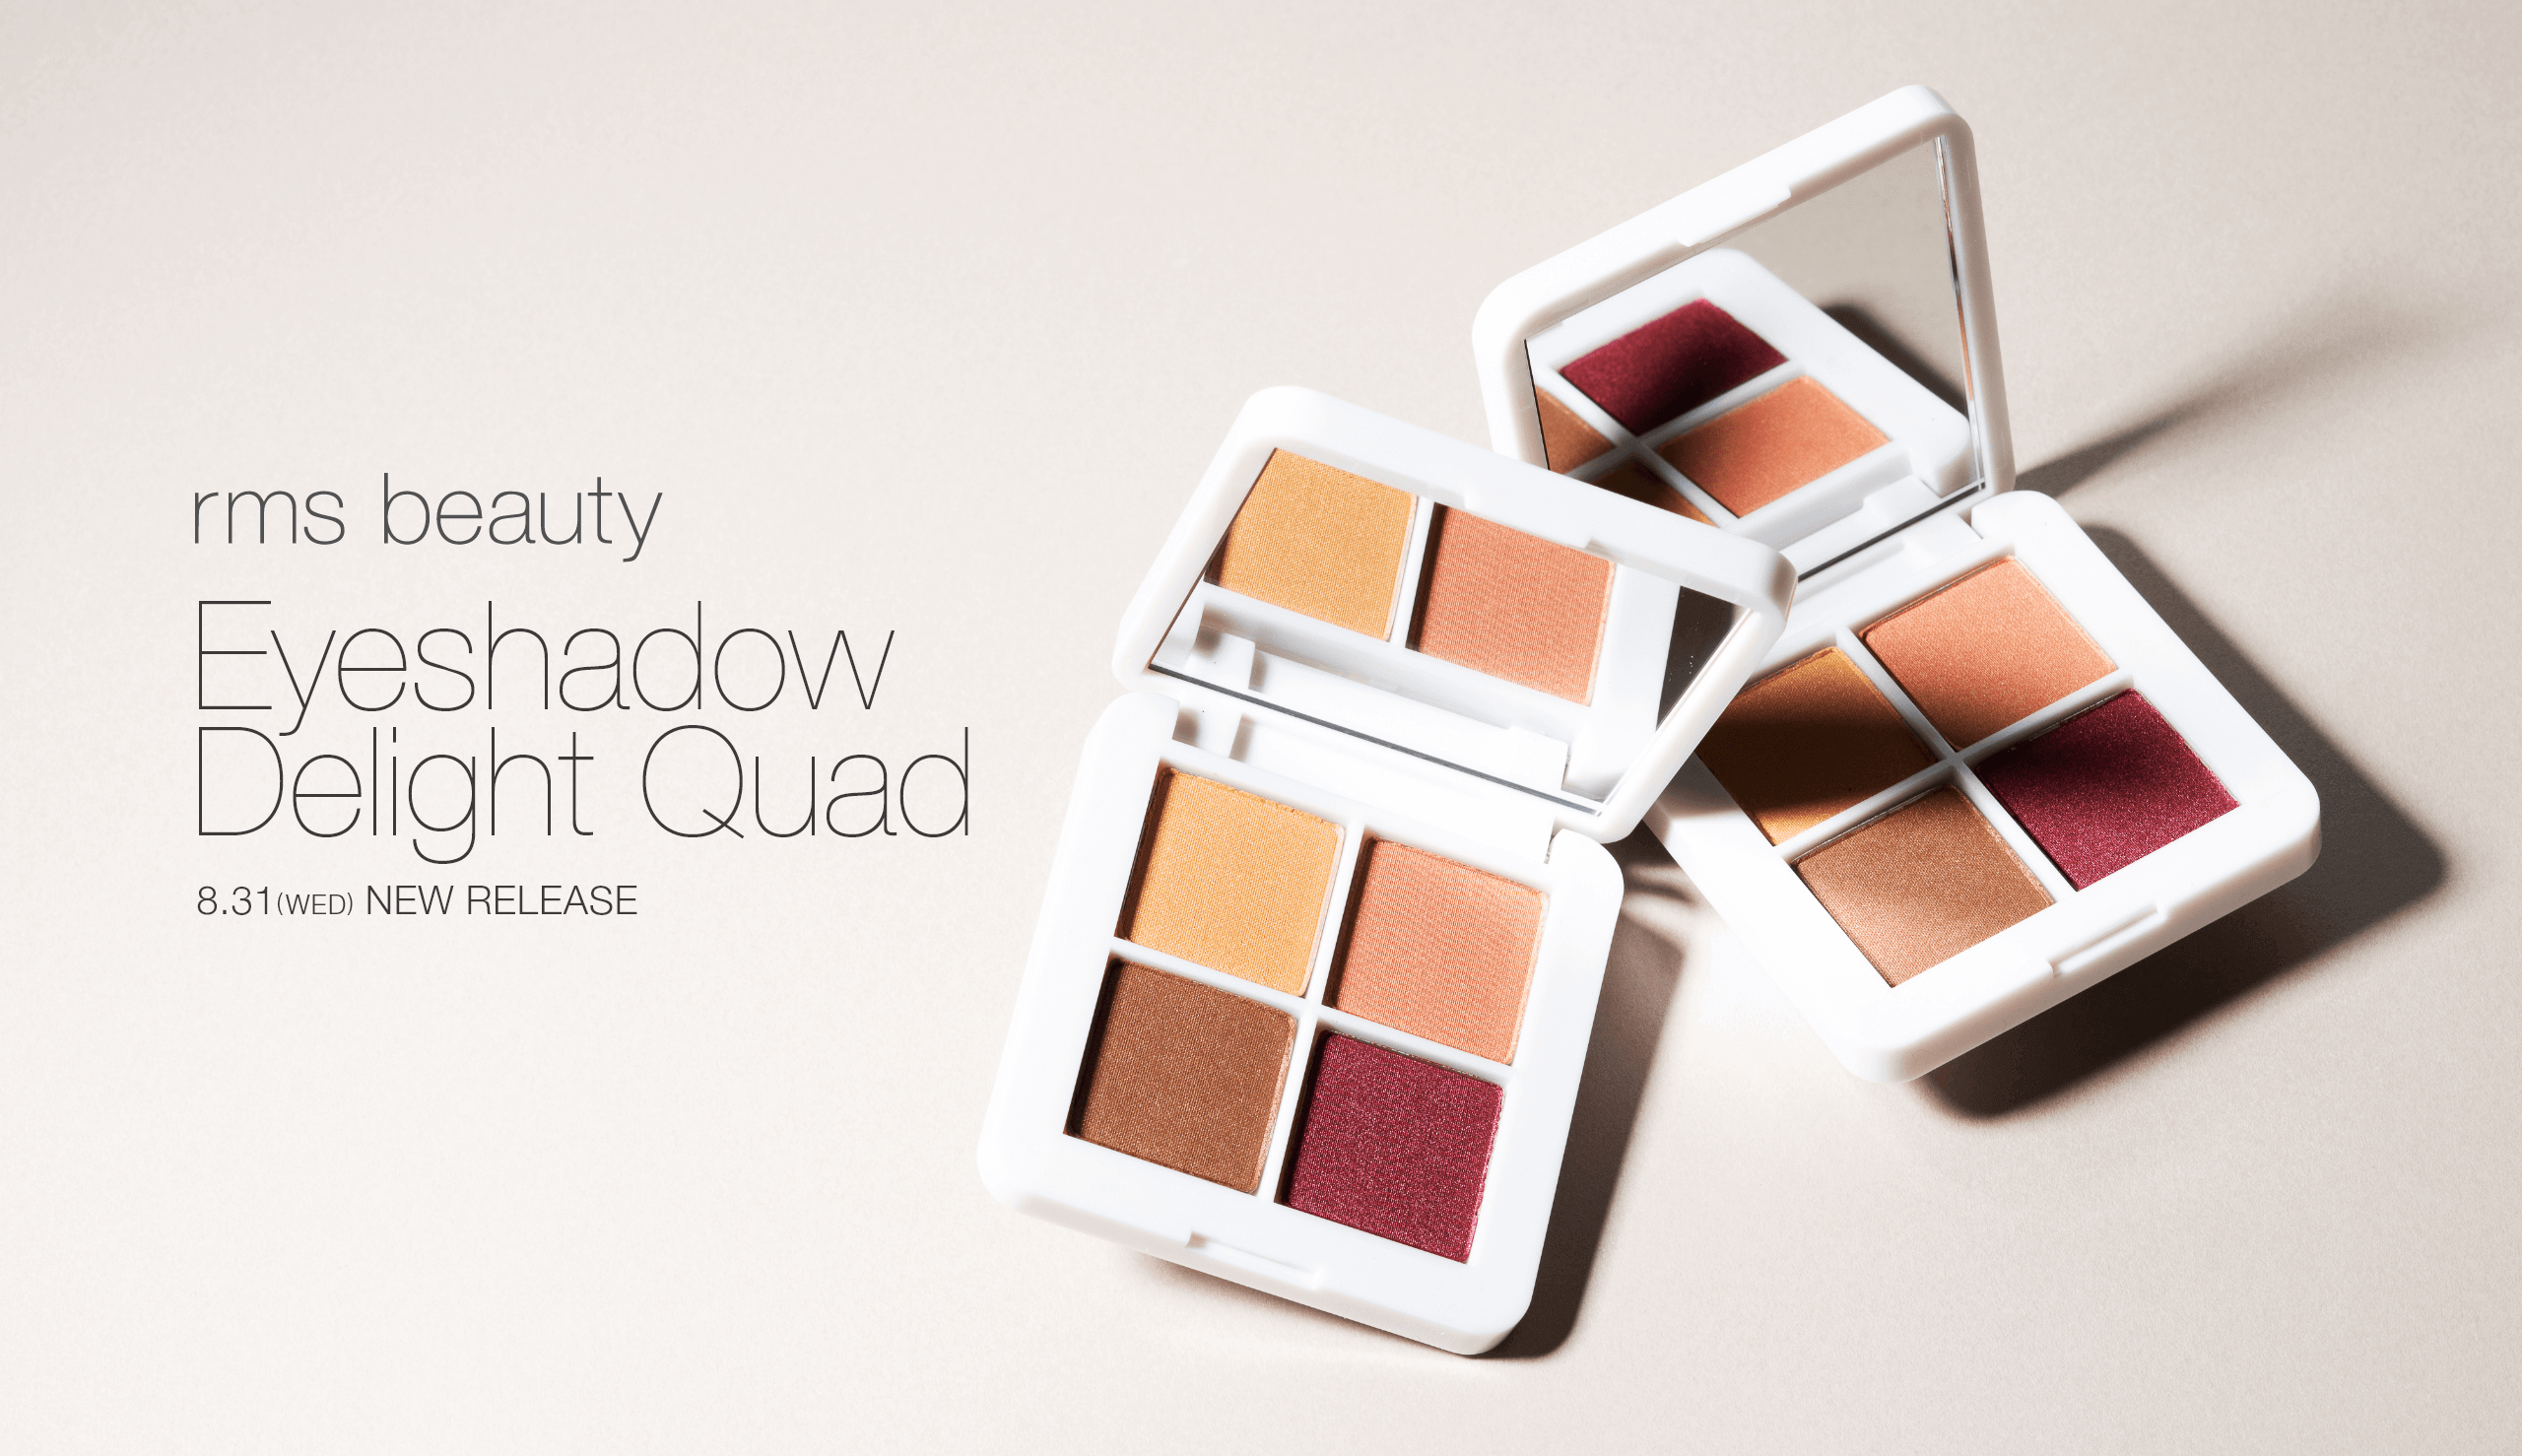 rms beauty Eyeshadow Delight Quad 8.31 (WED) NEW RELEASE